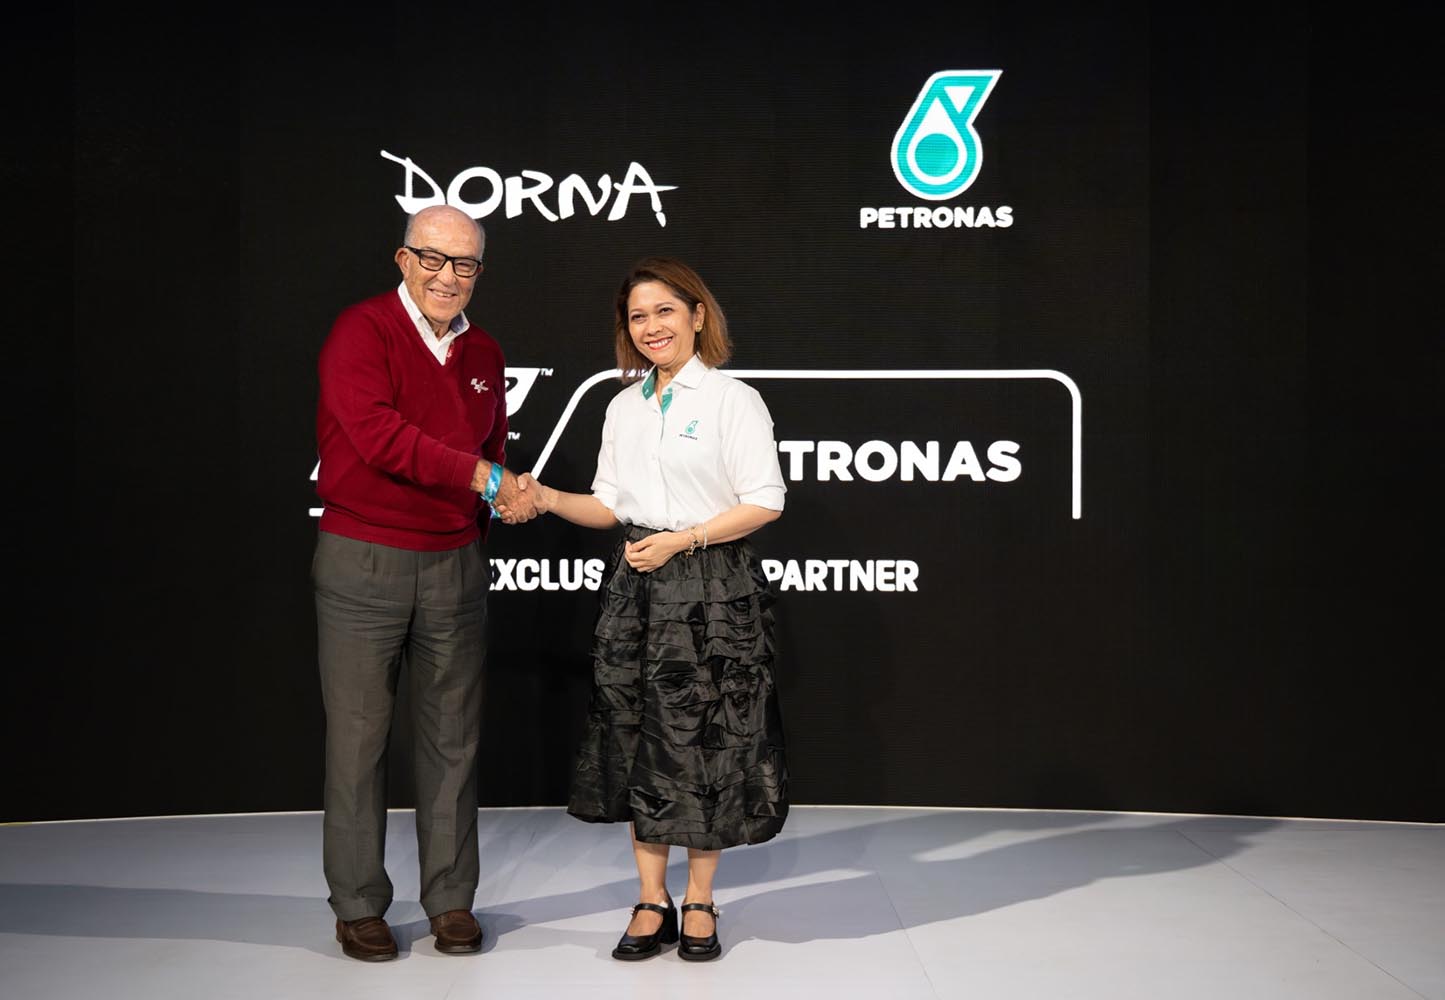 PETRONAS to introduce 40% biofuel blend in Moto2 and Moto3